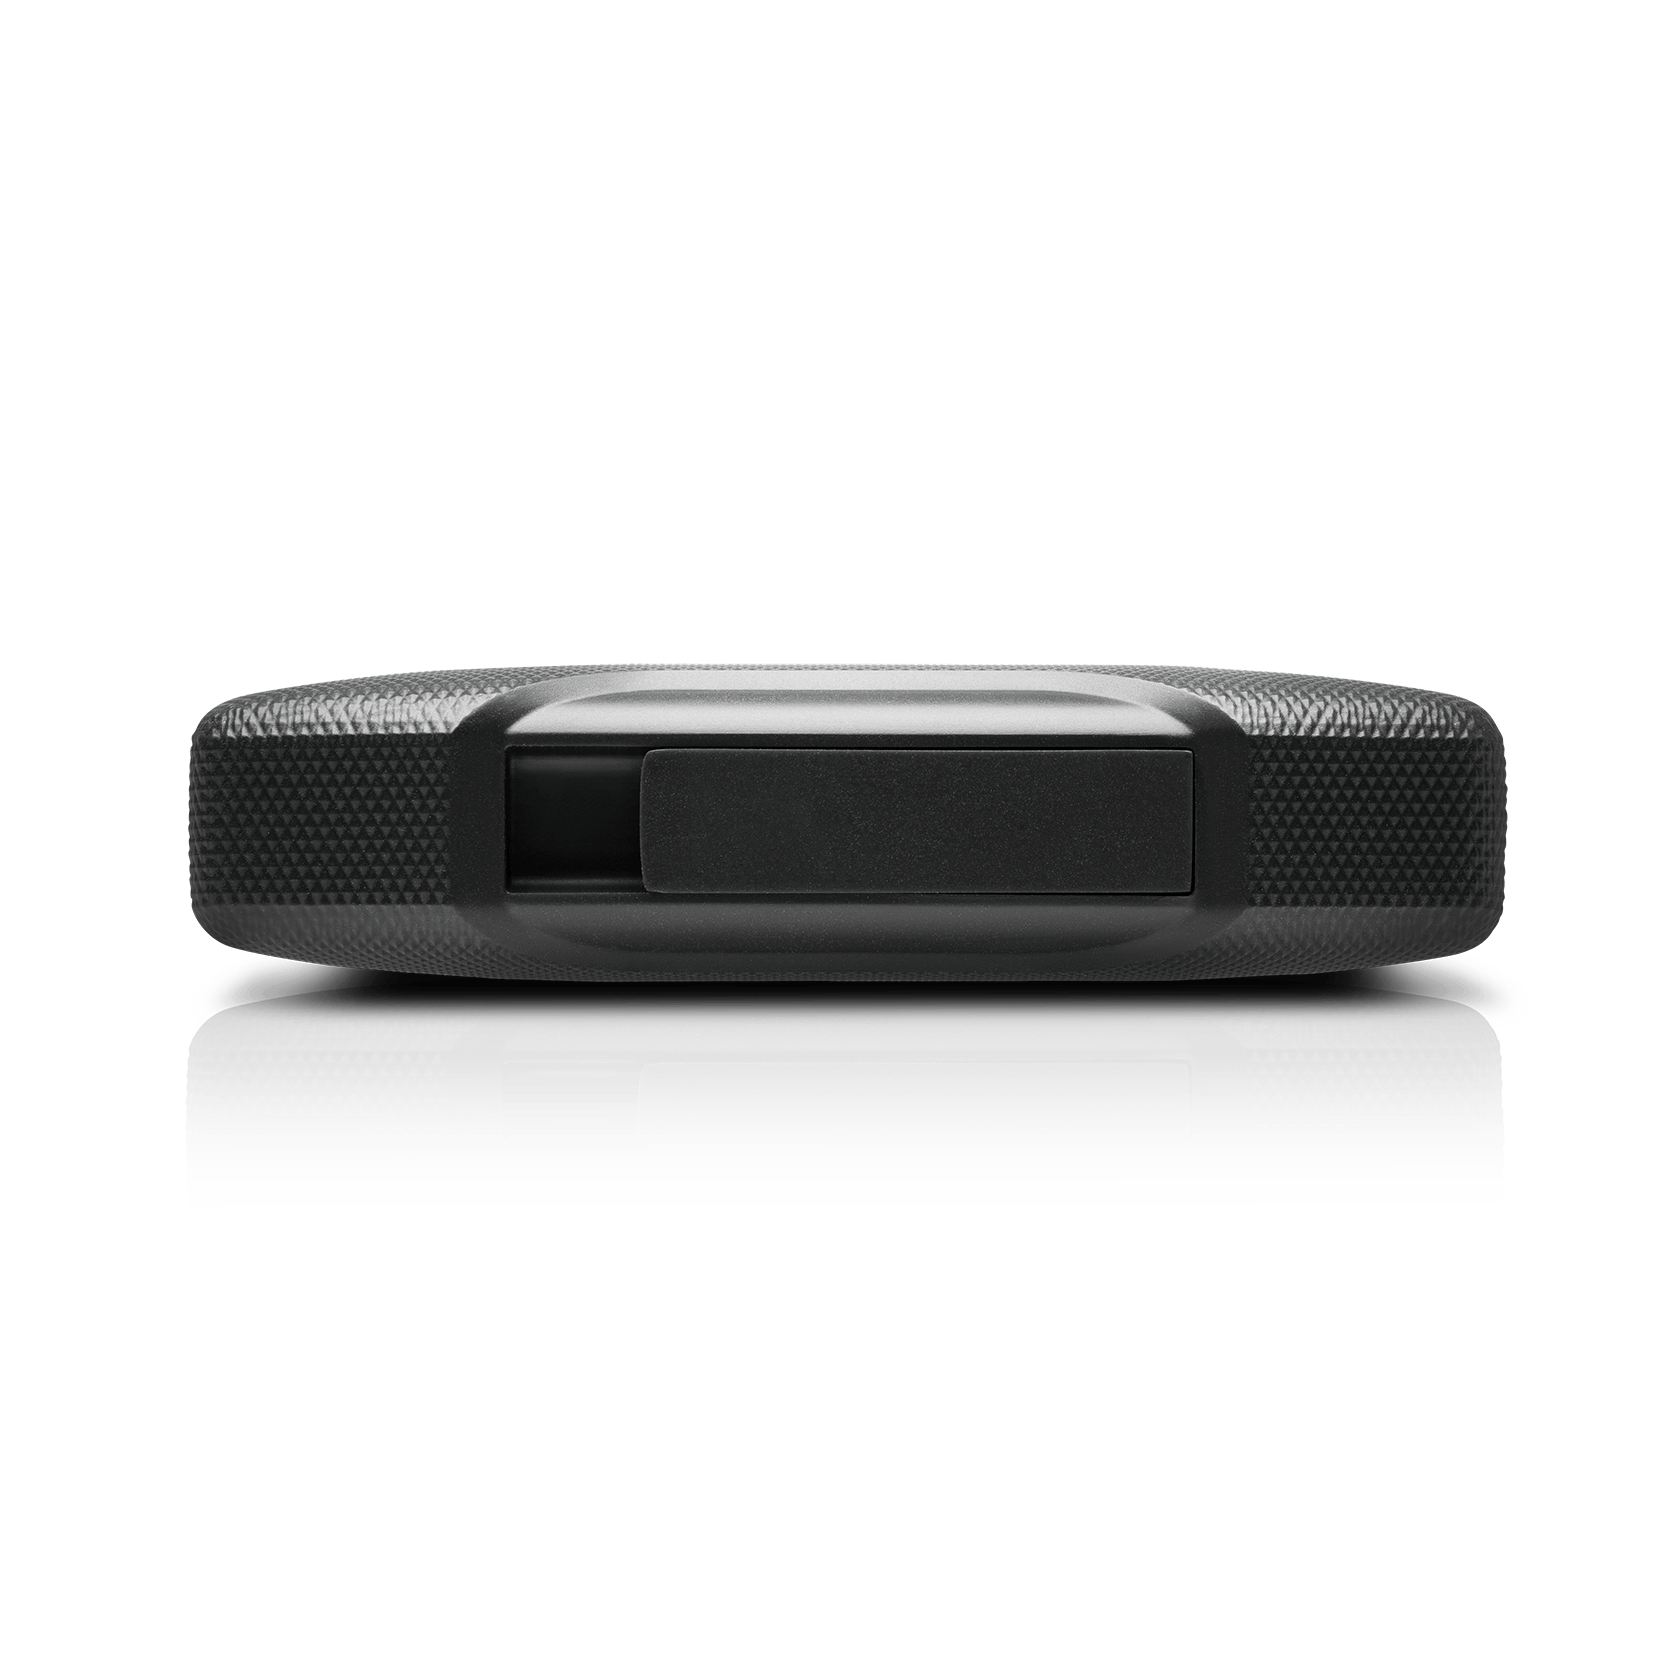 SanDisk Professional 1TB G-DRIVE ArmorATD, Portable External Hard Drive - SDPH81G-001T-GBAND - image 3 of 5